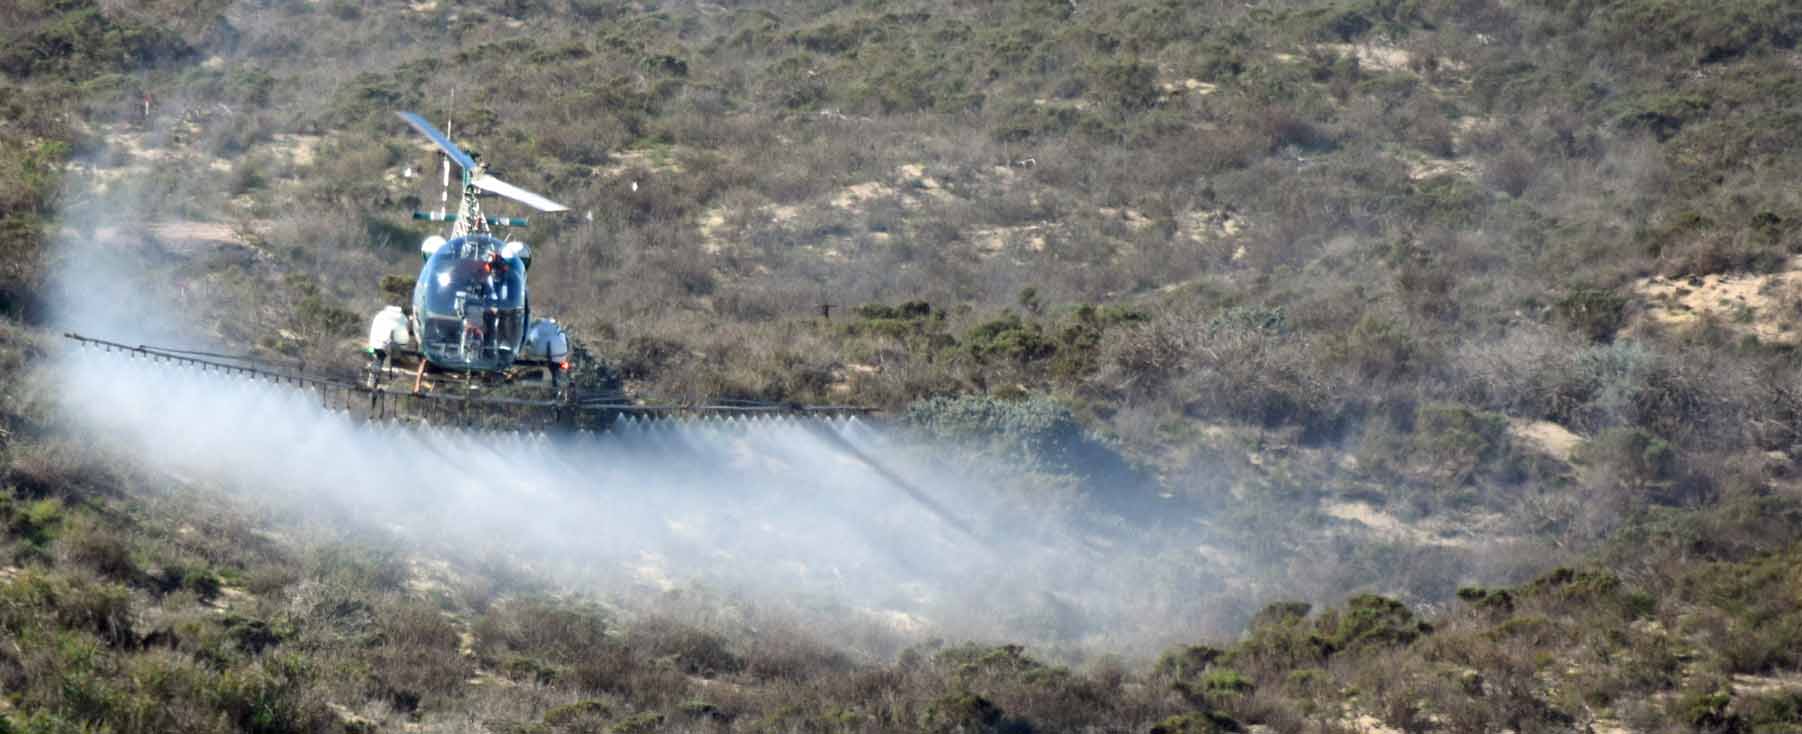 herbicide being applied to veldt grass via helicopter